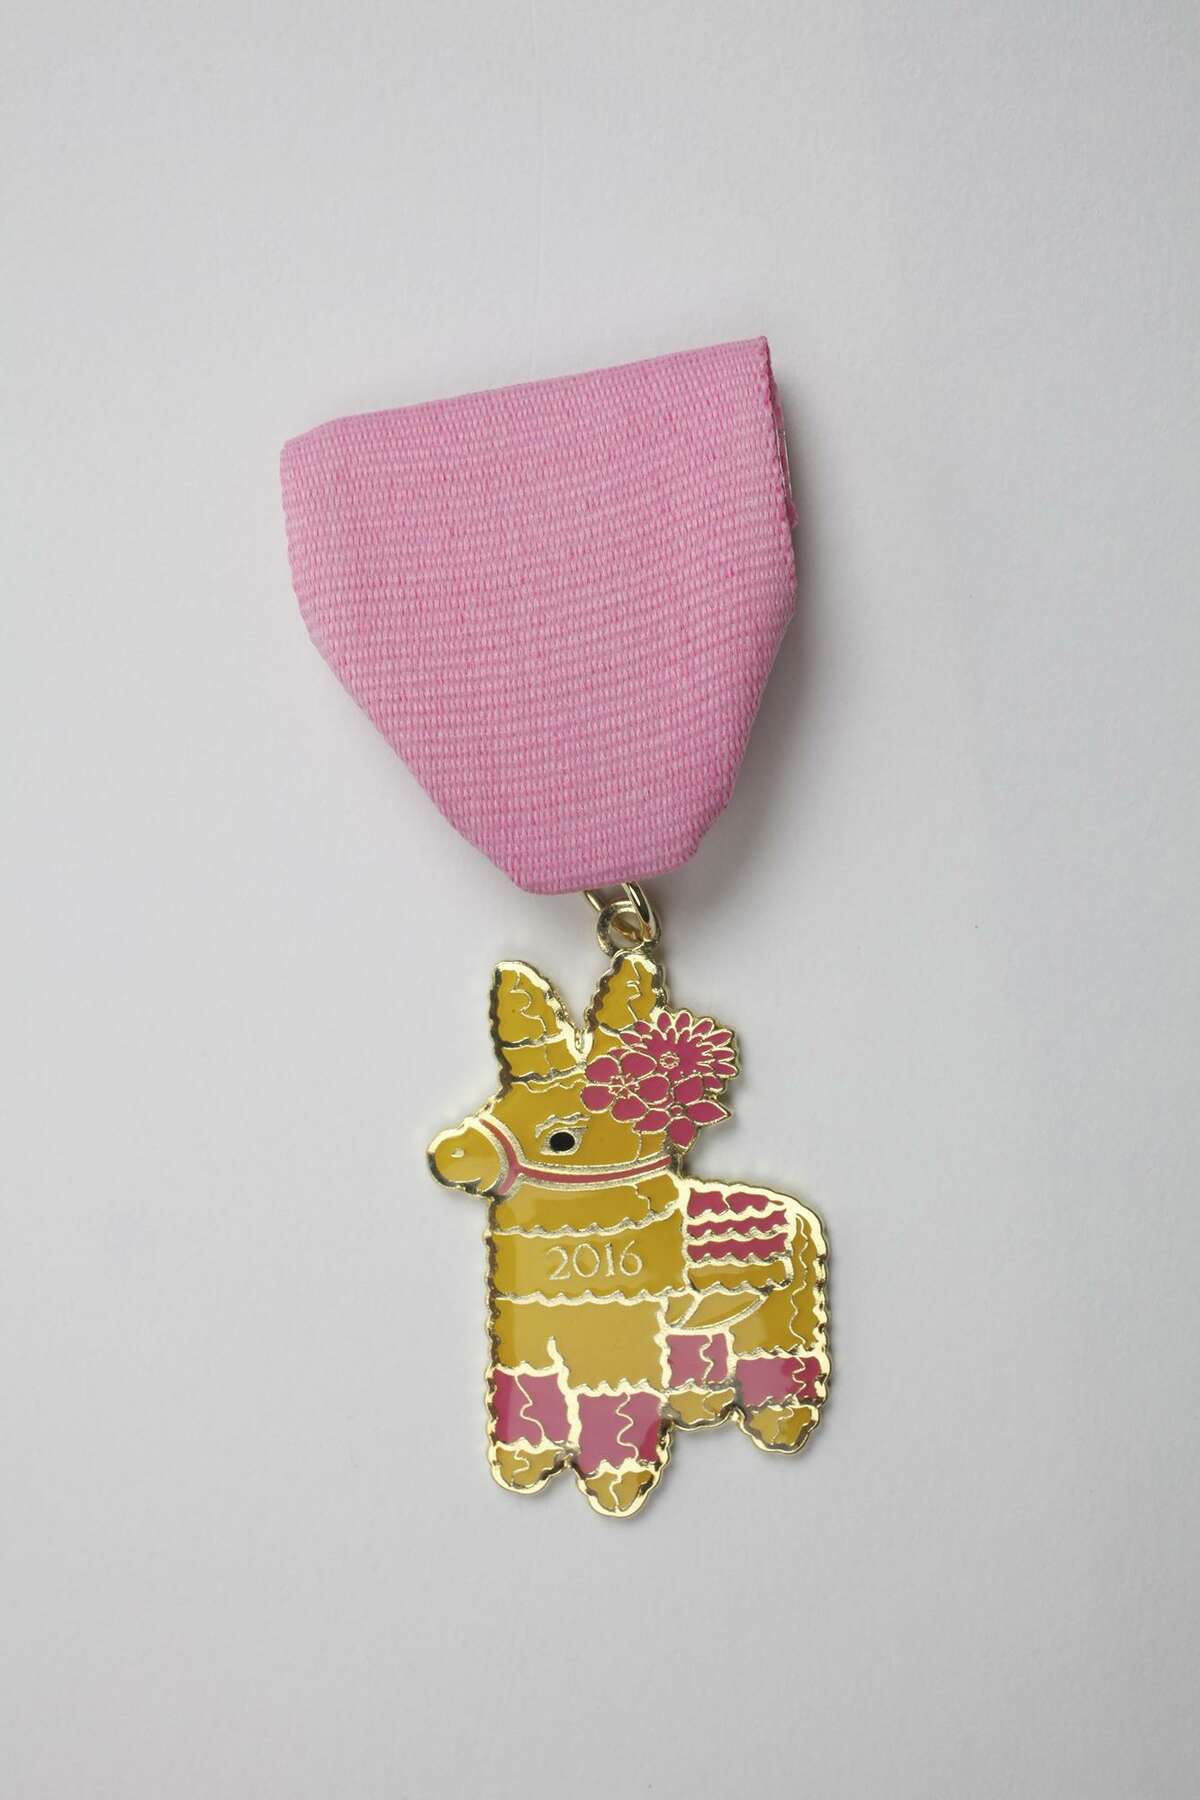 Small business. Winner: Bless Your Heart Giftique medal, no longer available